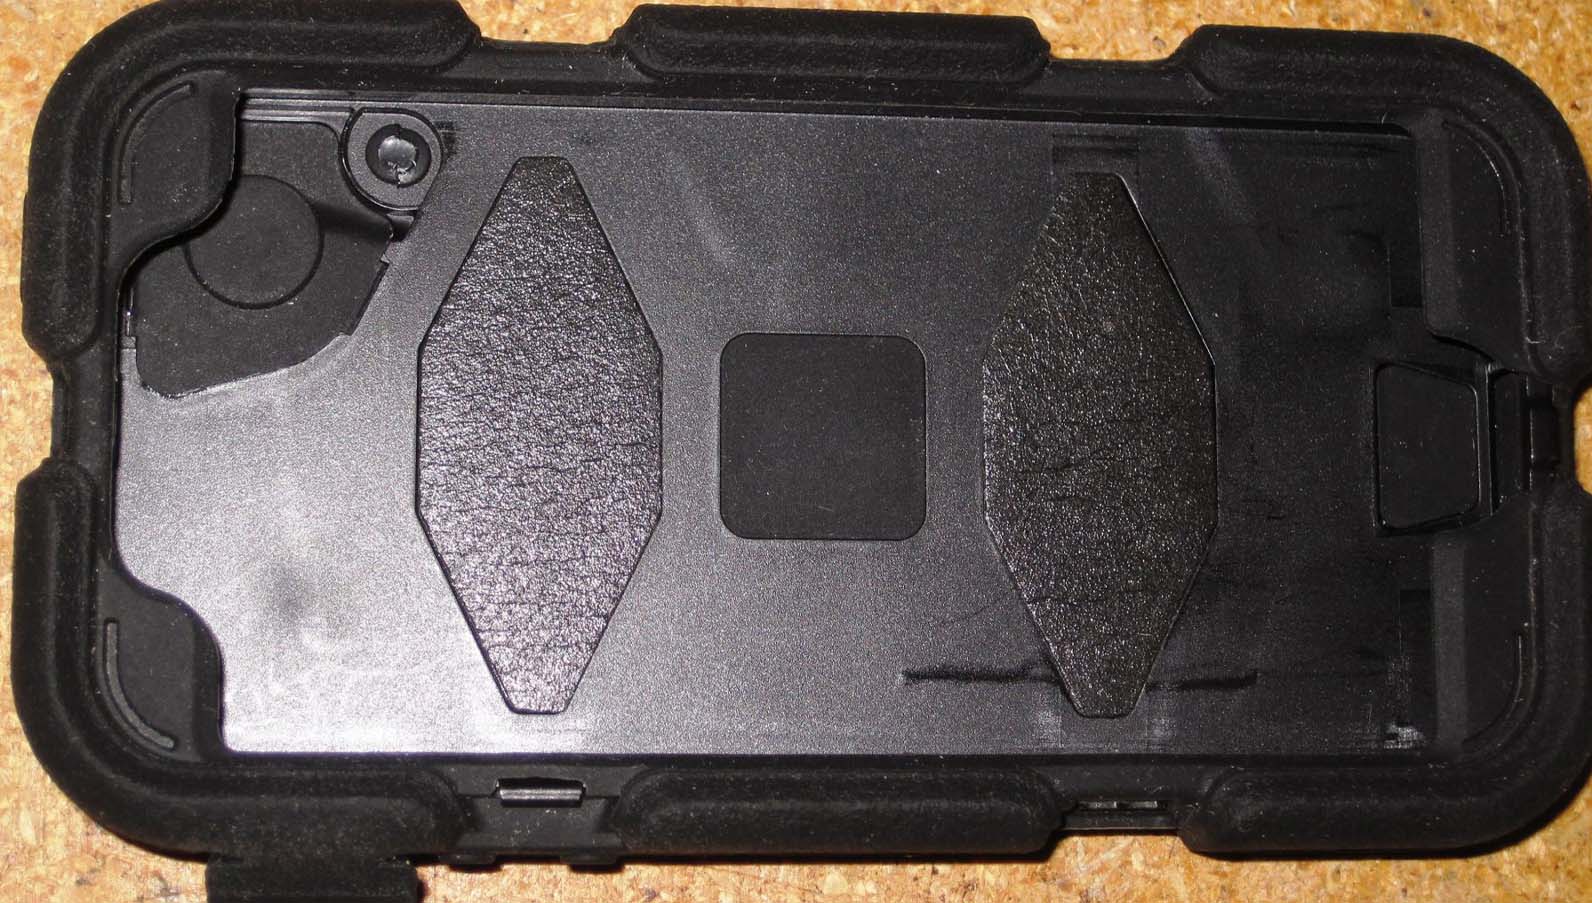 Smart phone case interior with no phone